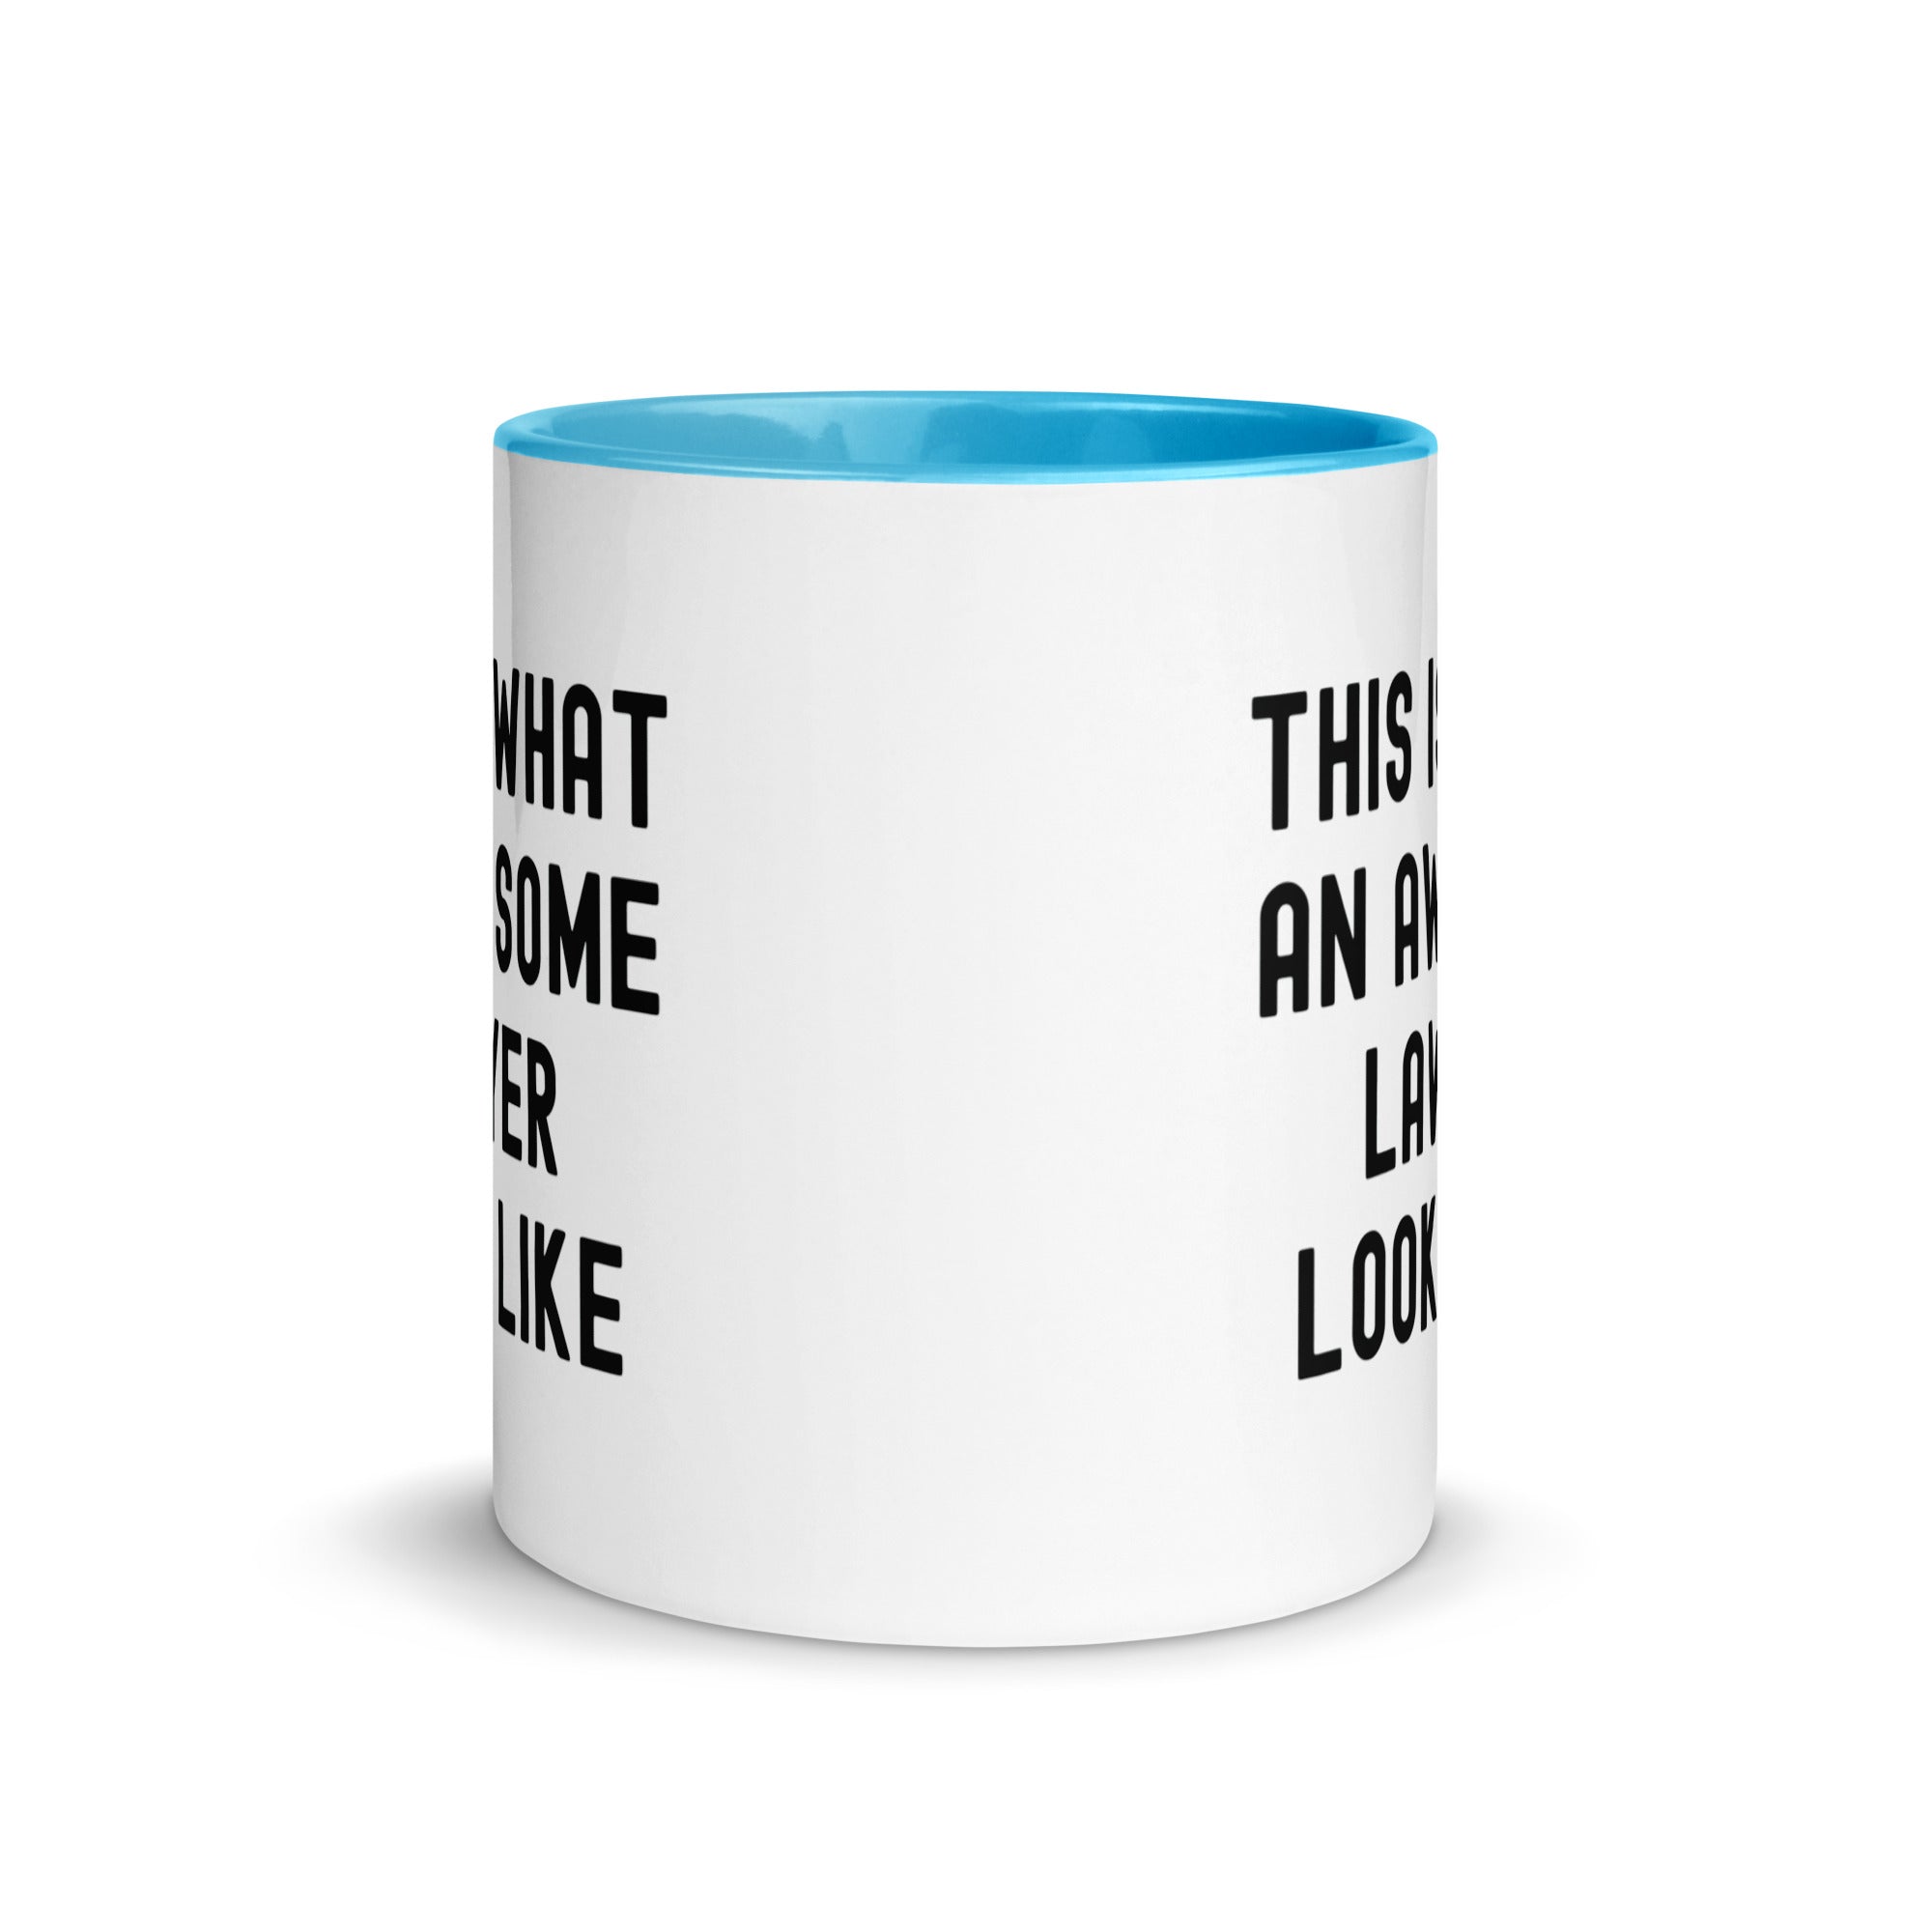 Mug with Color Inside | This is what an awesome lawyer looks like